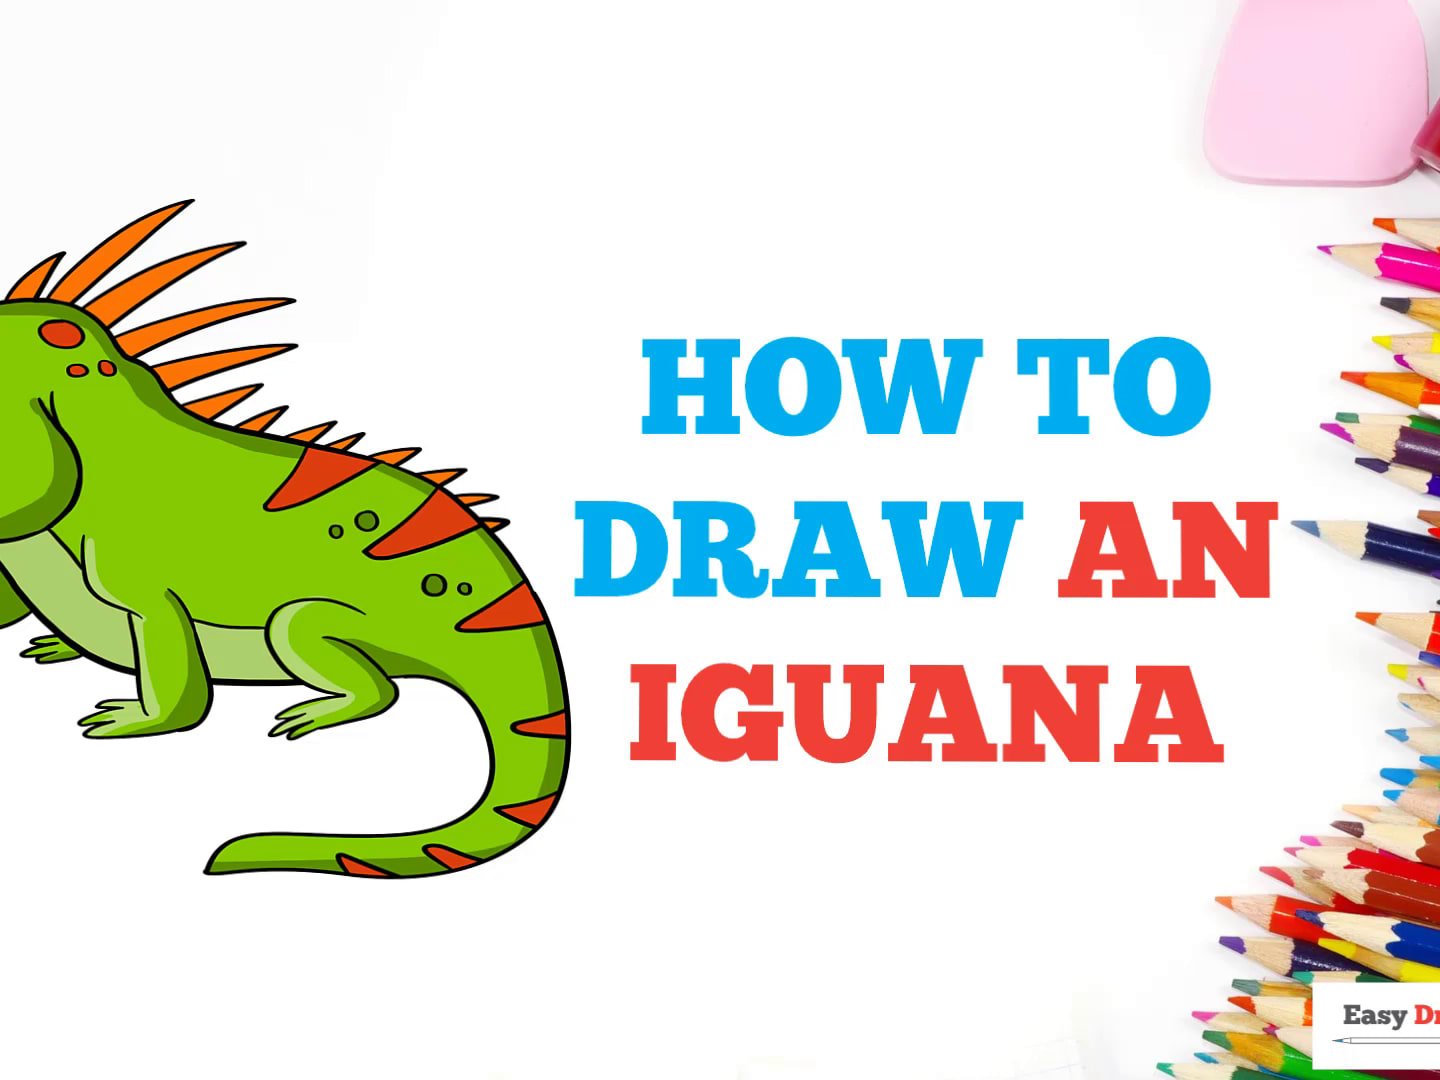 How to Draw an Iguana - Really Easy Drawing Tutorial